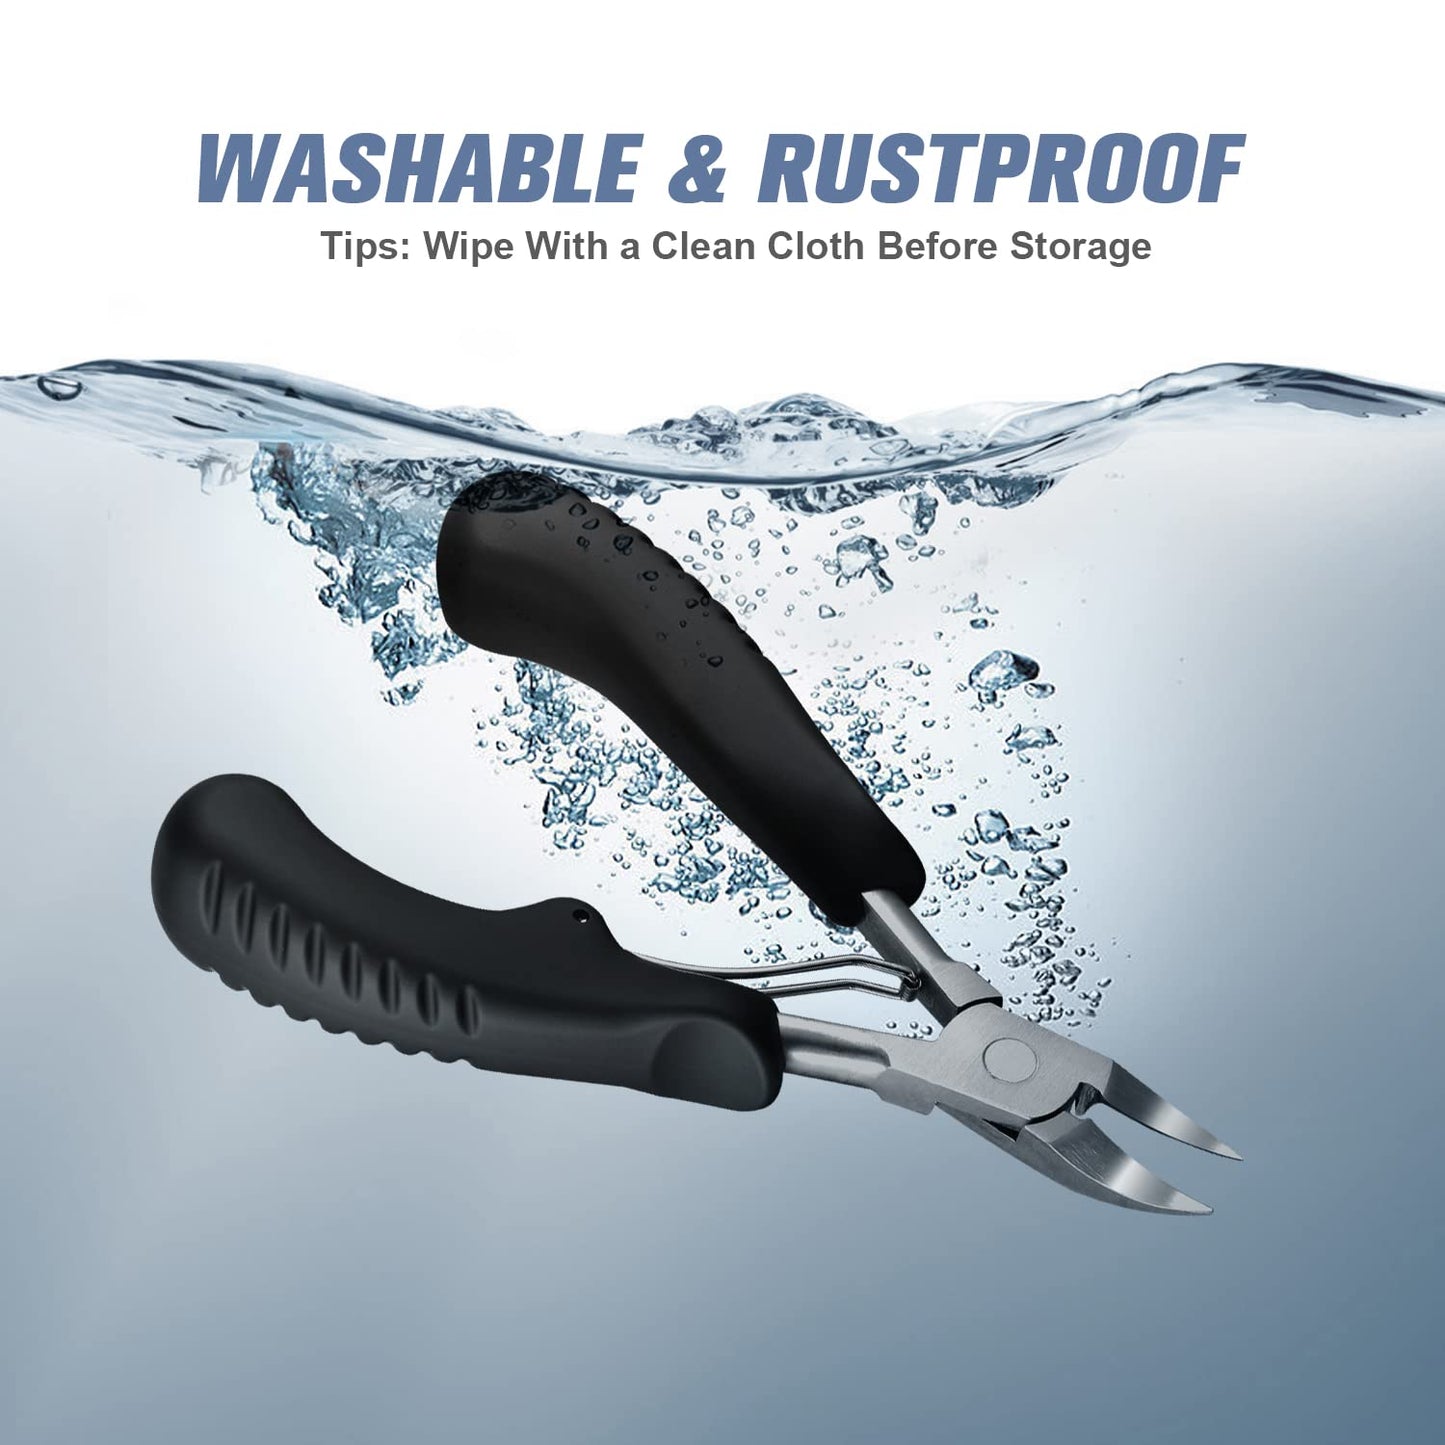 A pair of nail clippers for thick toenails is submerged in water. The text says, 'Washable and rustproof.'